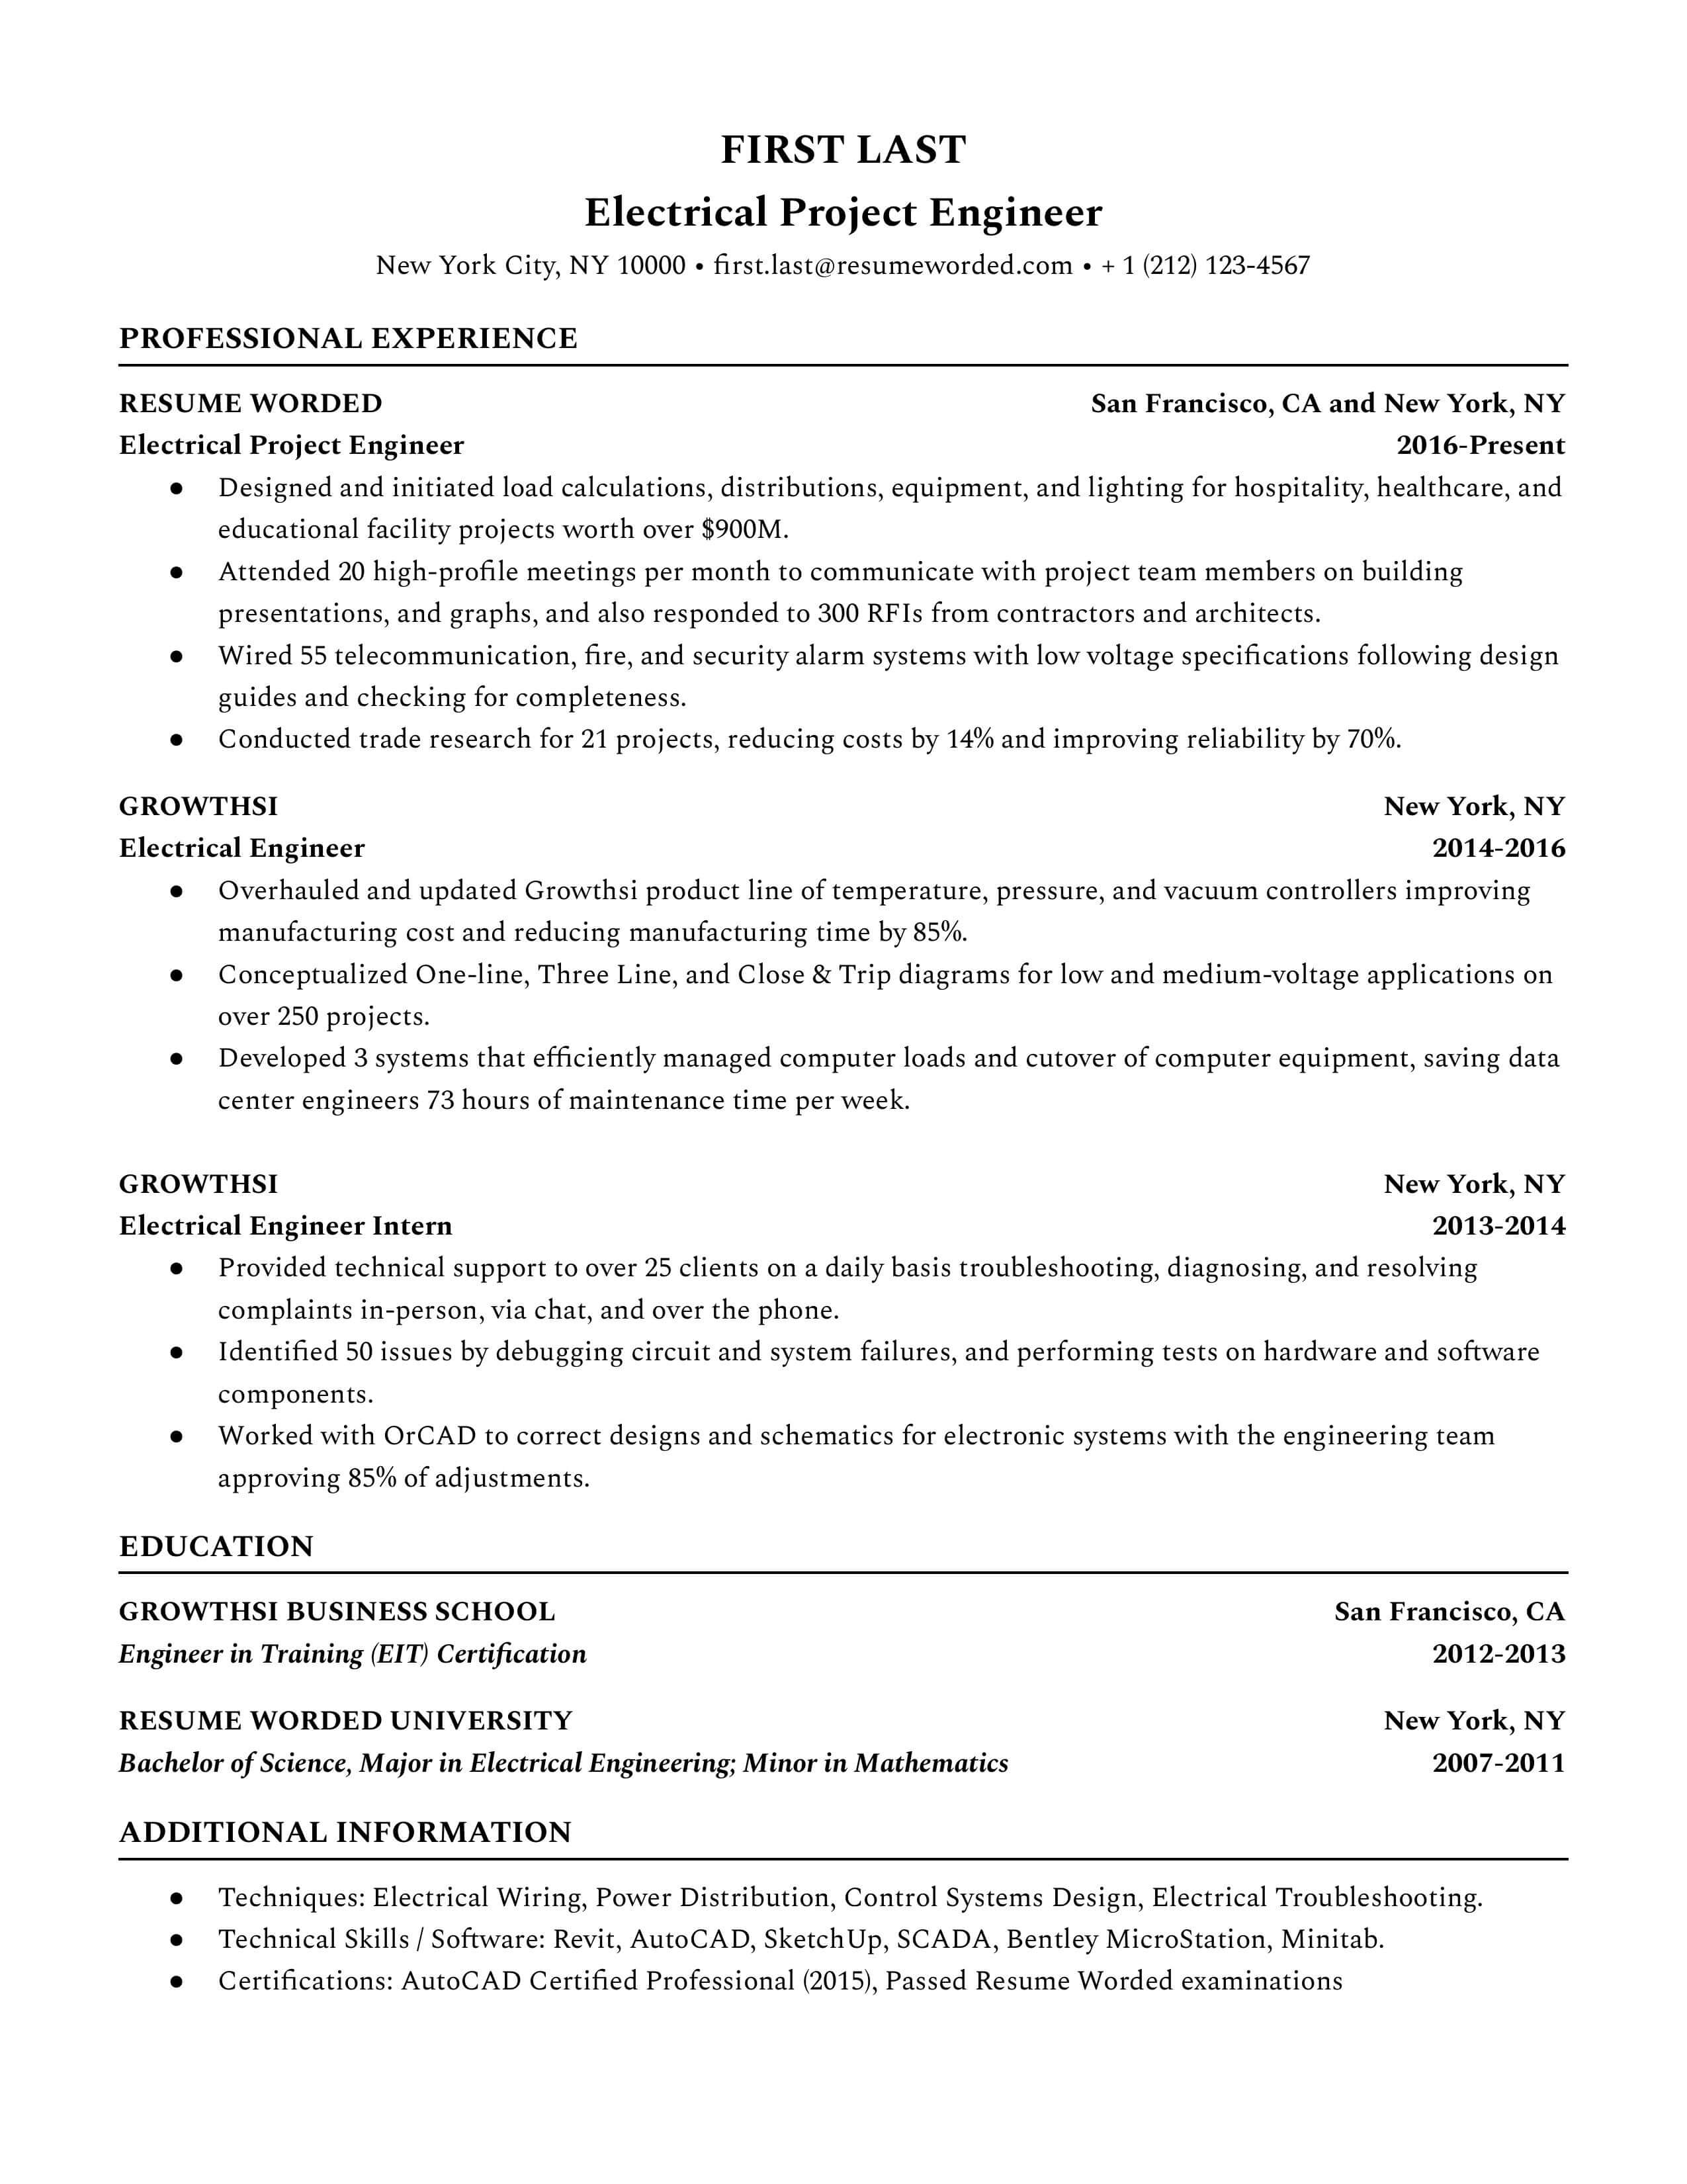 Electrical Project Engineer  Resume Sample